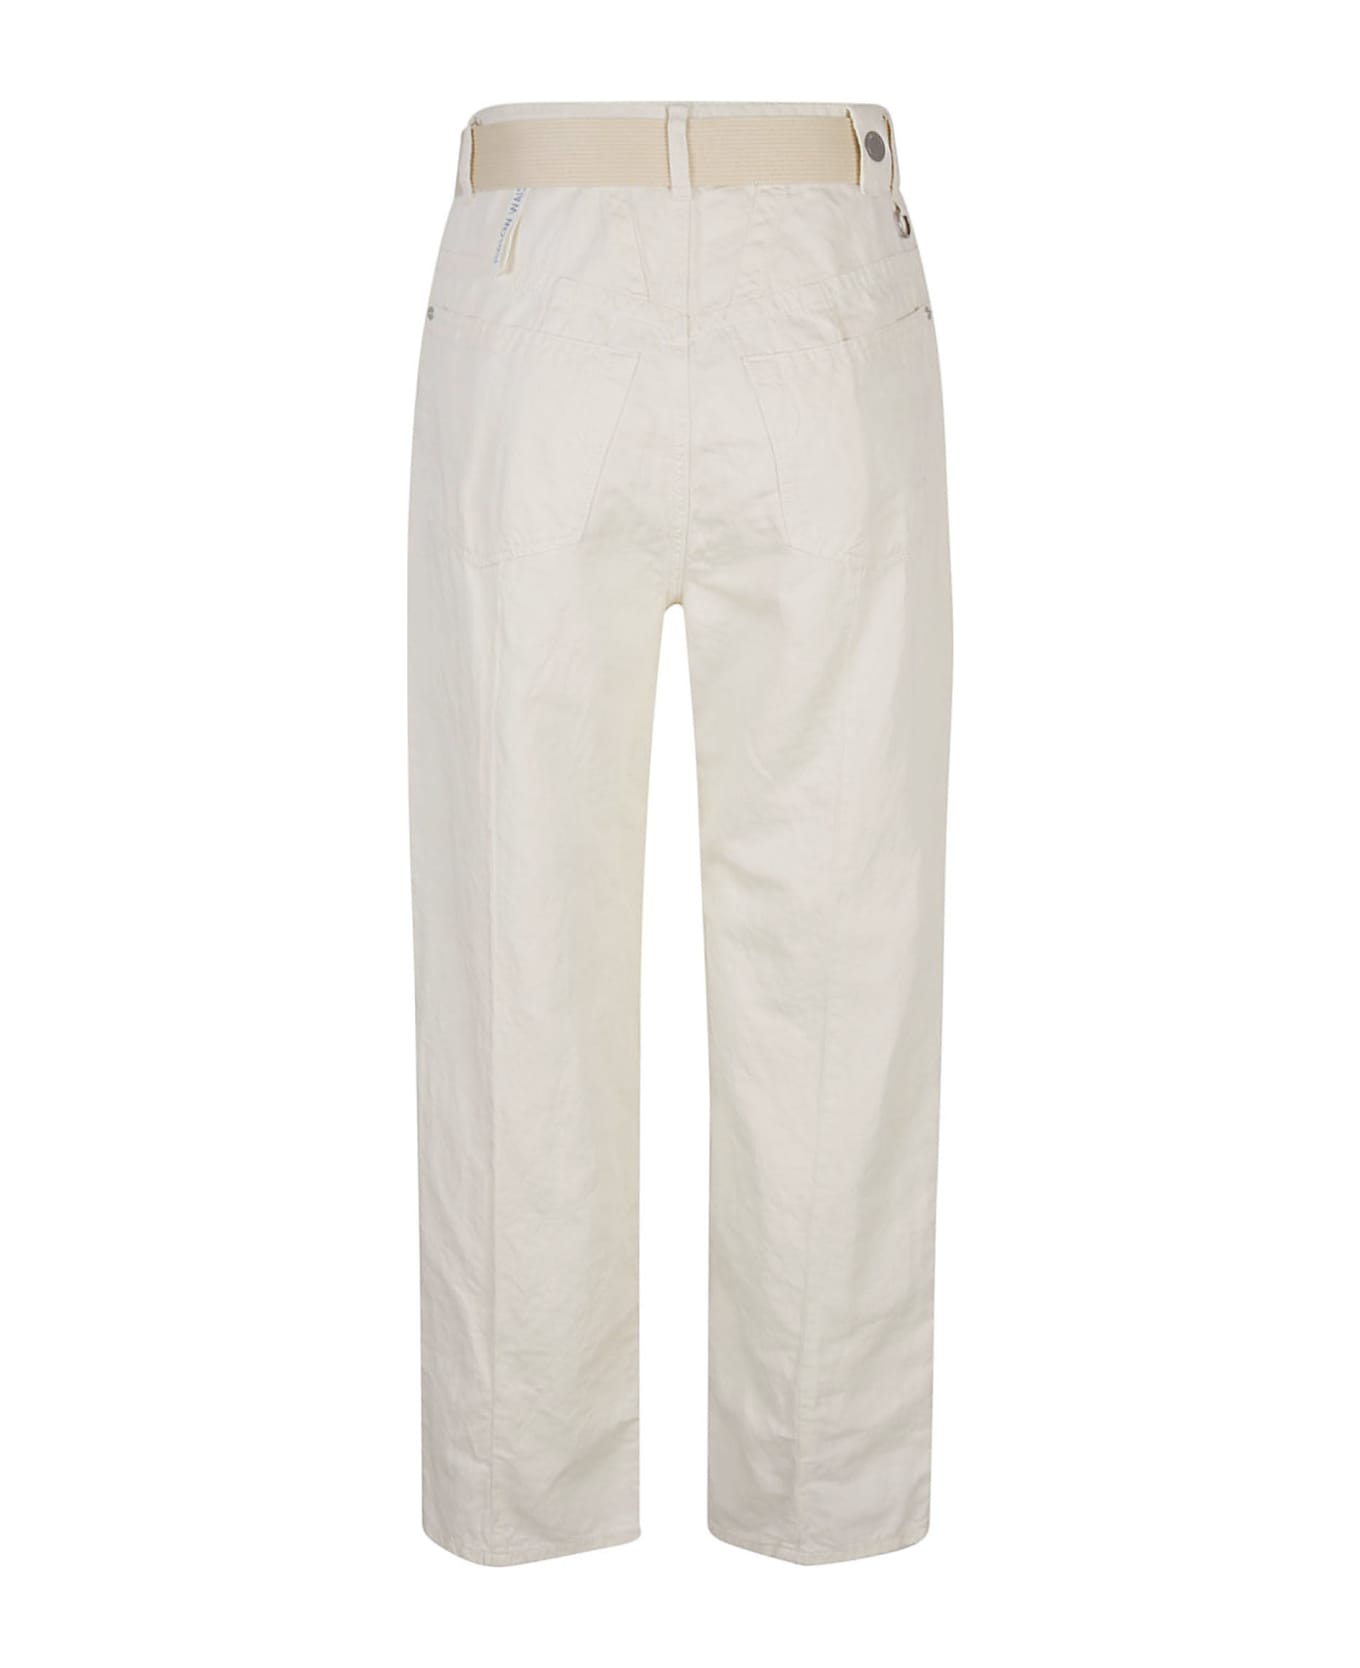 High Trousers - White ボトムス